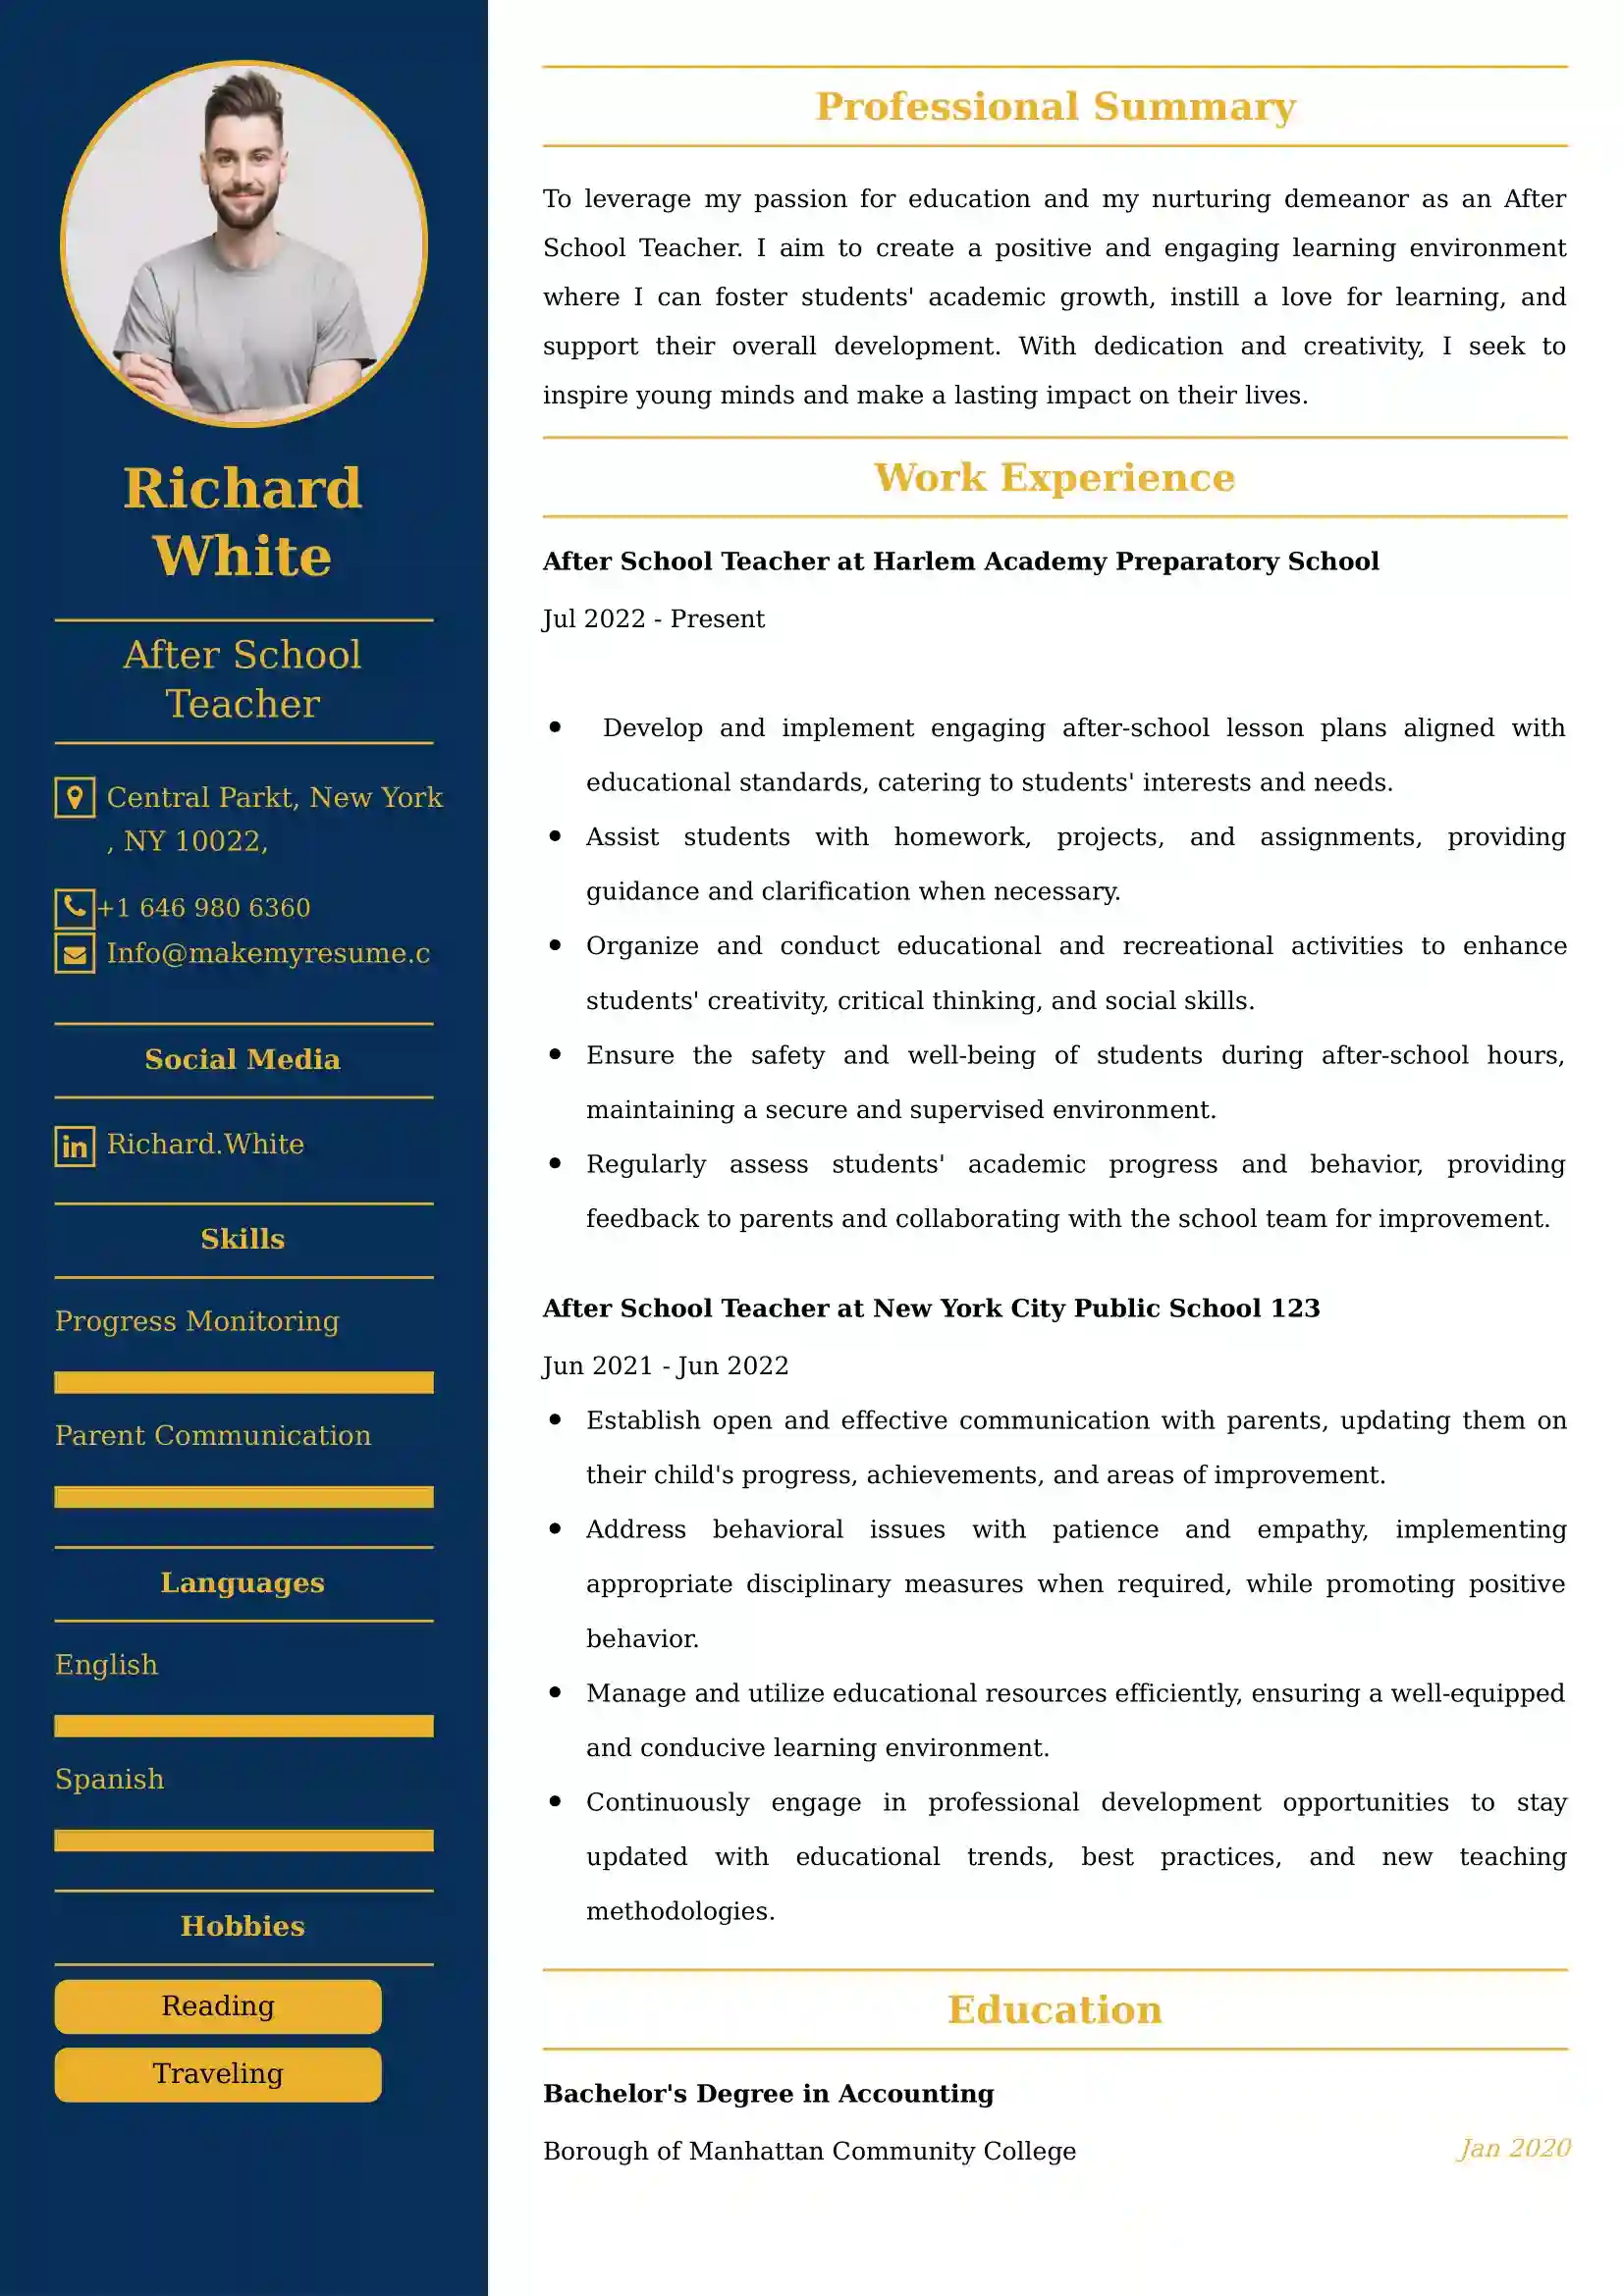 After School Teacher Resume Examples - UK Format, Latest Template.